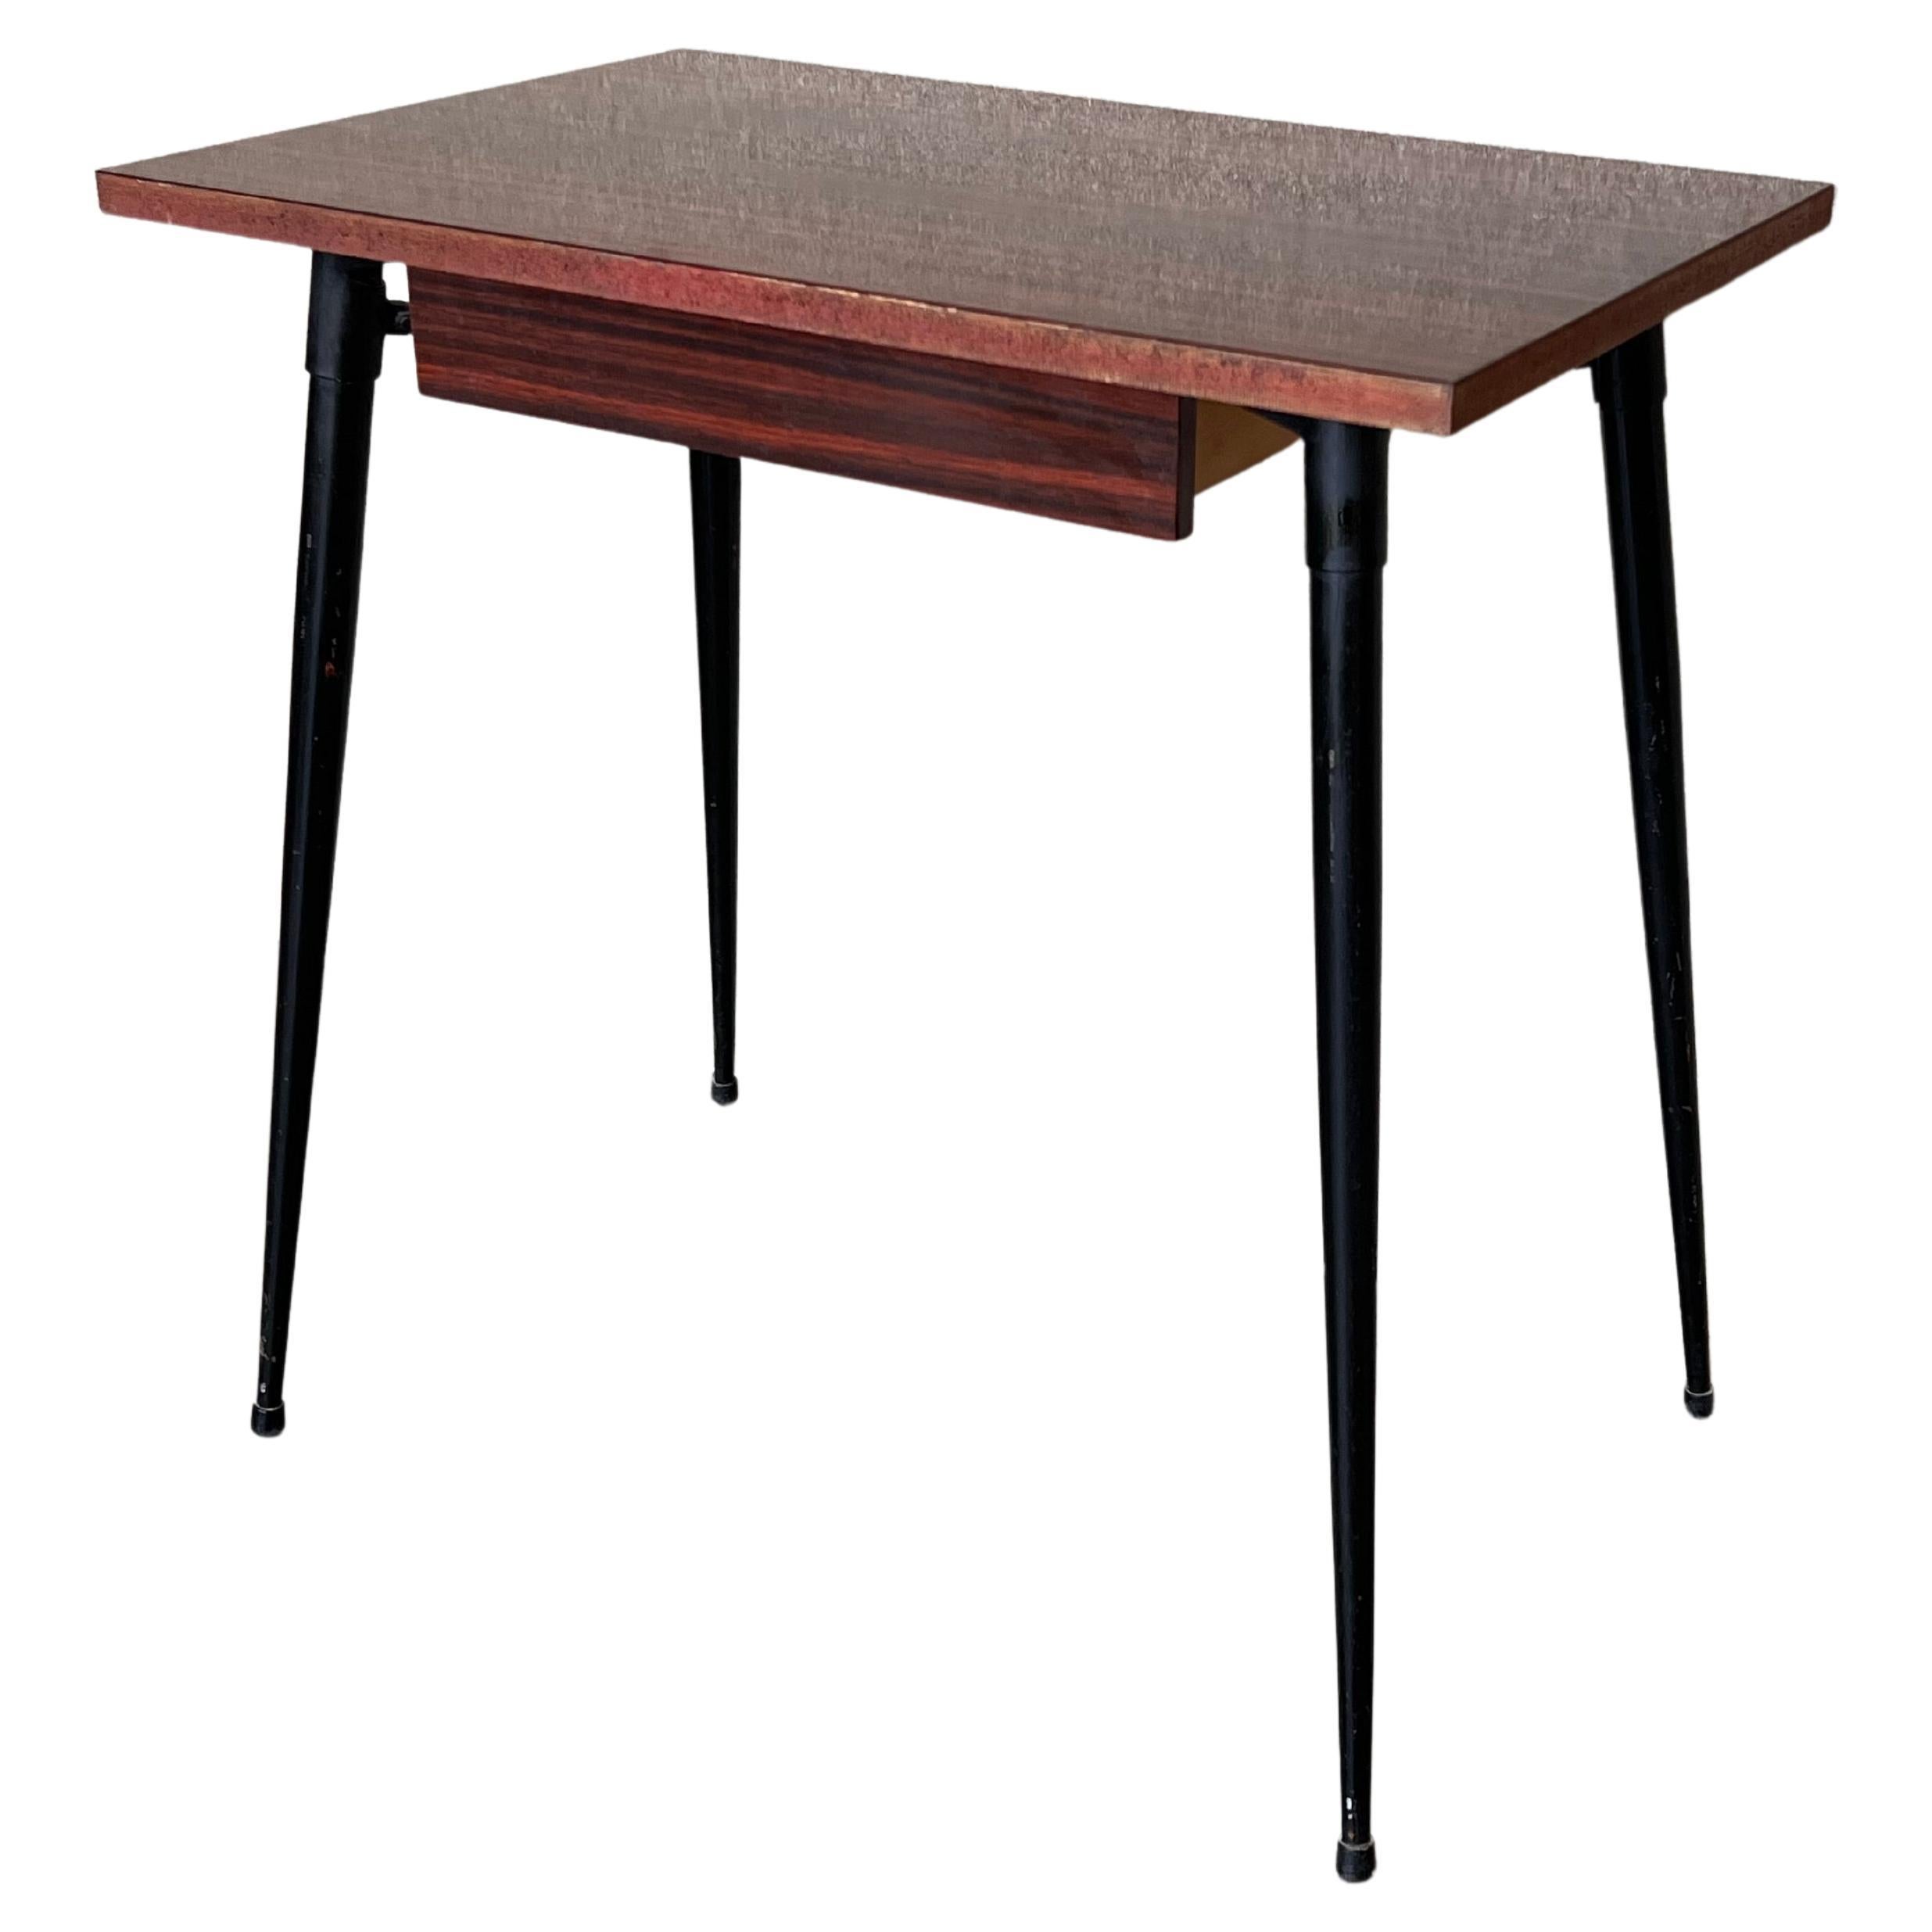 Mid Century Modern School Desk with drawer and Iron Legs, 8 pieces available